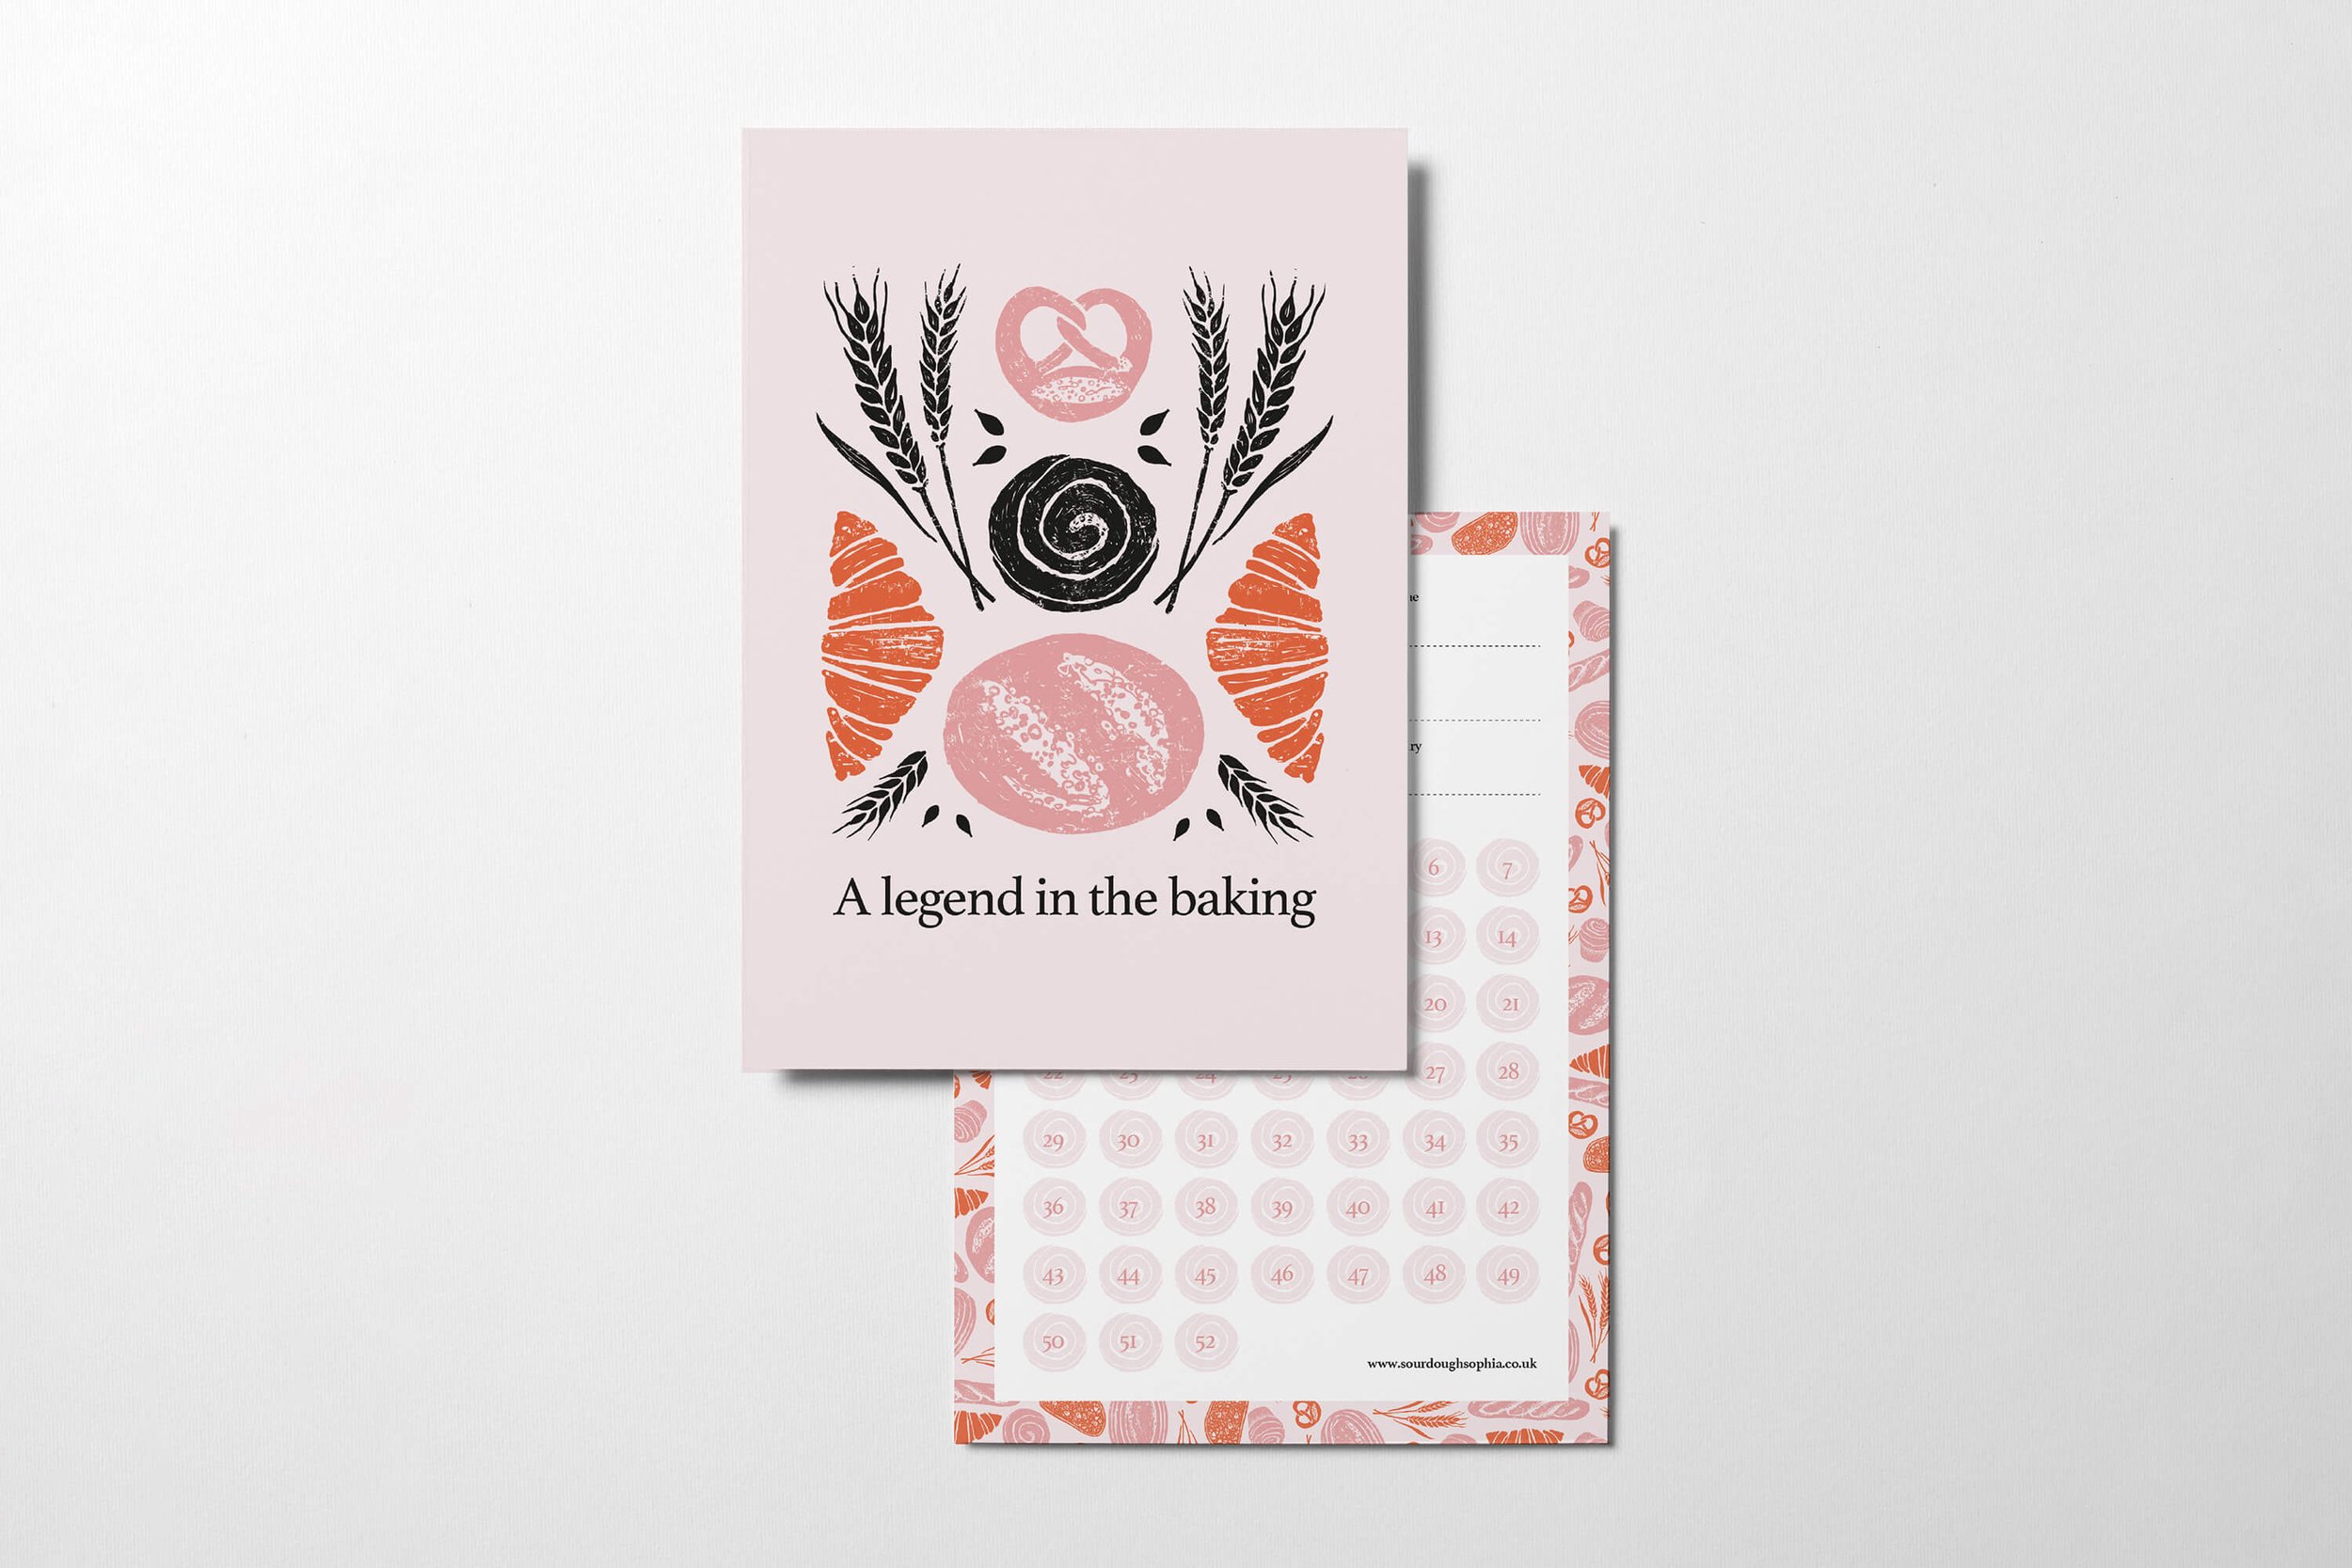  Illustrated postcard design to advertise a sourdough bakery. The illustrations are hand printed in black, orange and pink. 